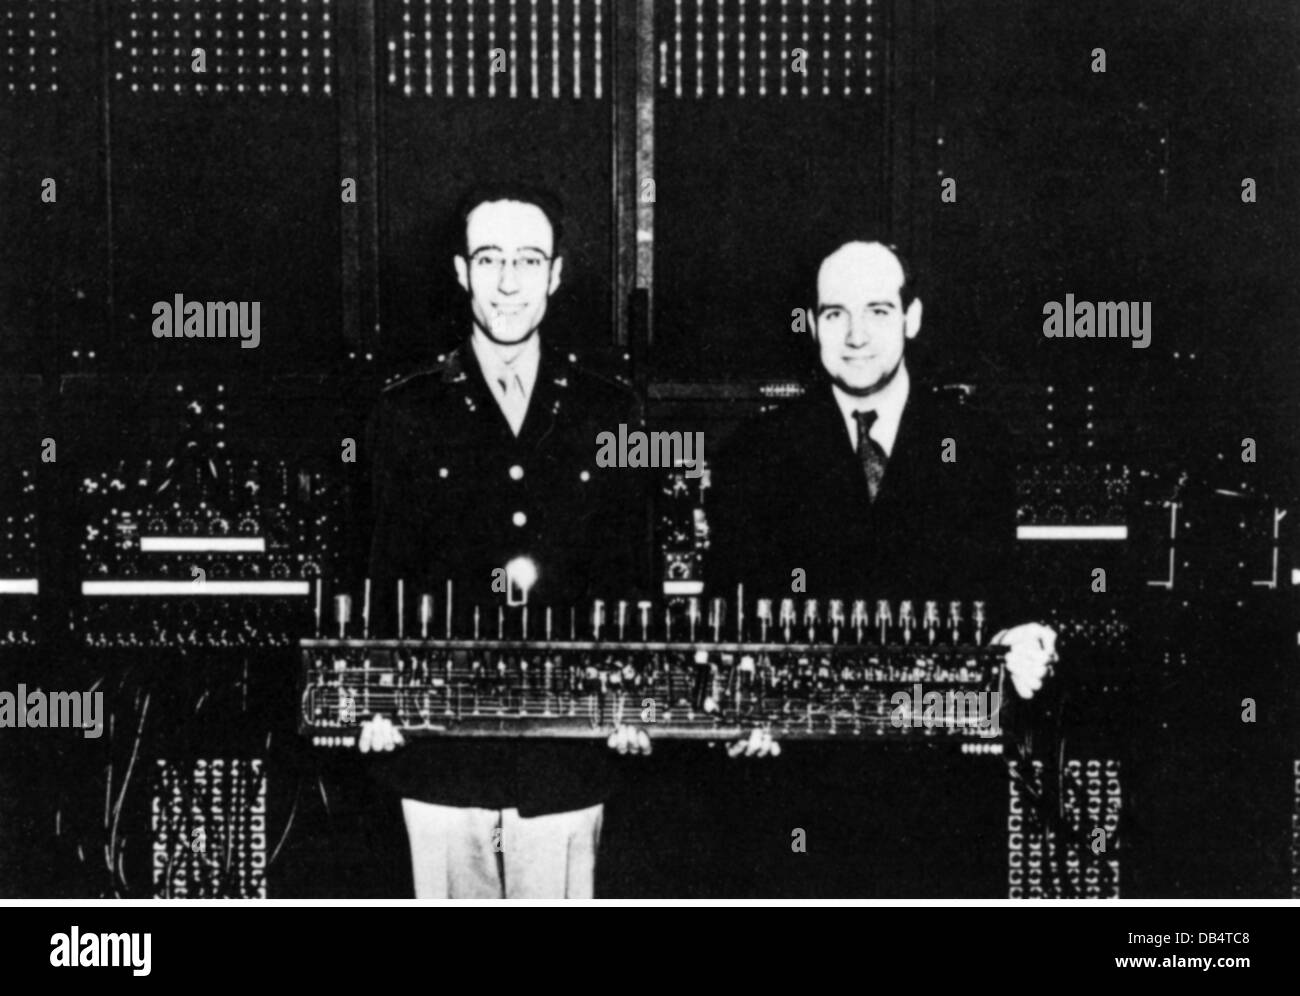 electronics, data processing, computer, ENIAC (Electronical Numerical and Computer), J.P. Eckert (right) and Captain Goldstine, developers of the ENIAC with ring counter, 1946, Additional-Rights-Clearences-Not Available Stock Photo